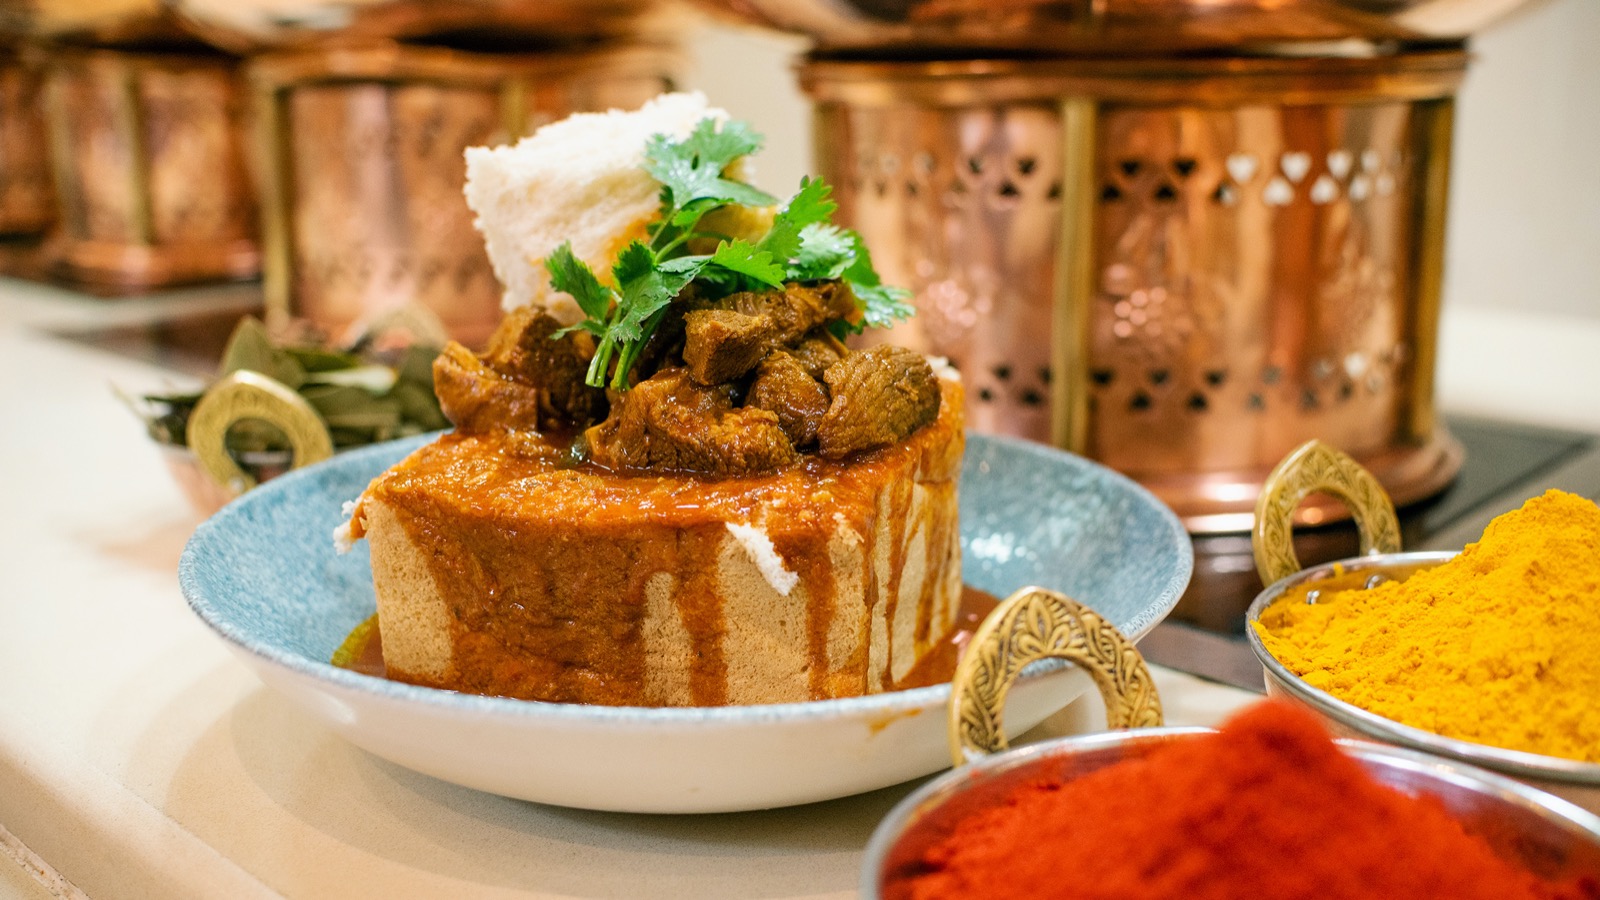 Eat & Travel 'Round World to Know How Rich You'll Be in… Quiz Bunny chow from South Africa